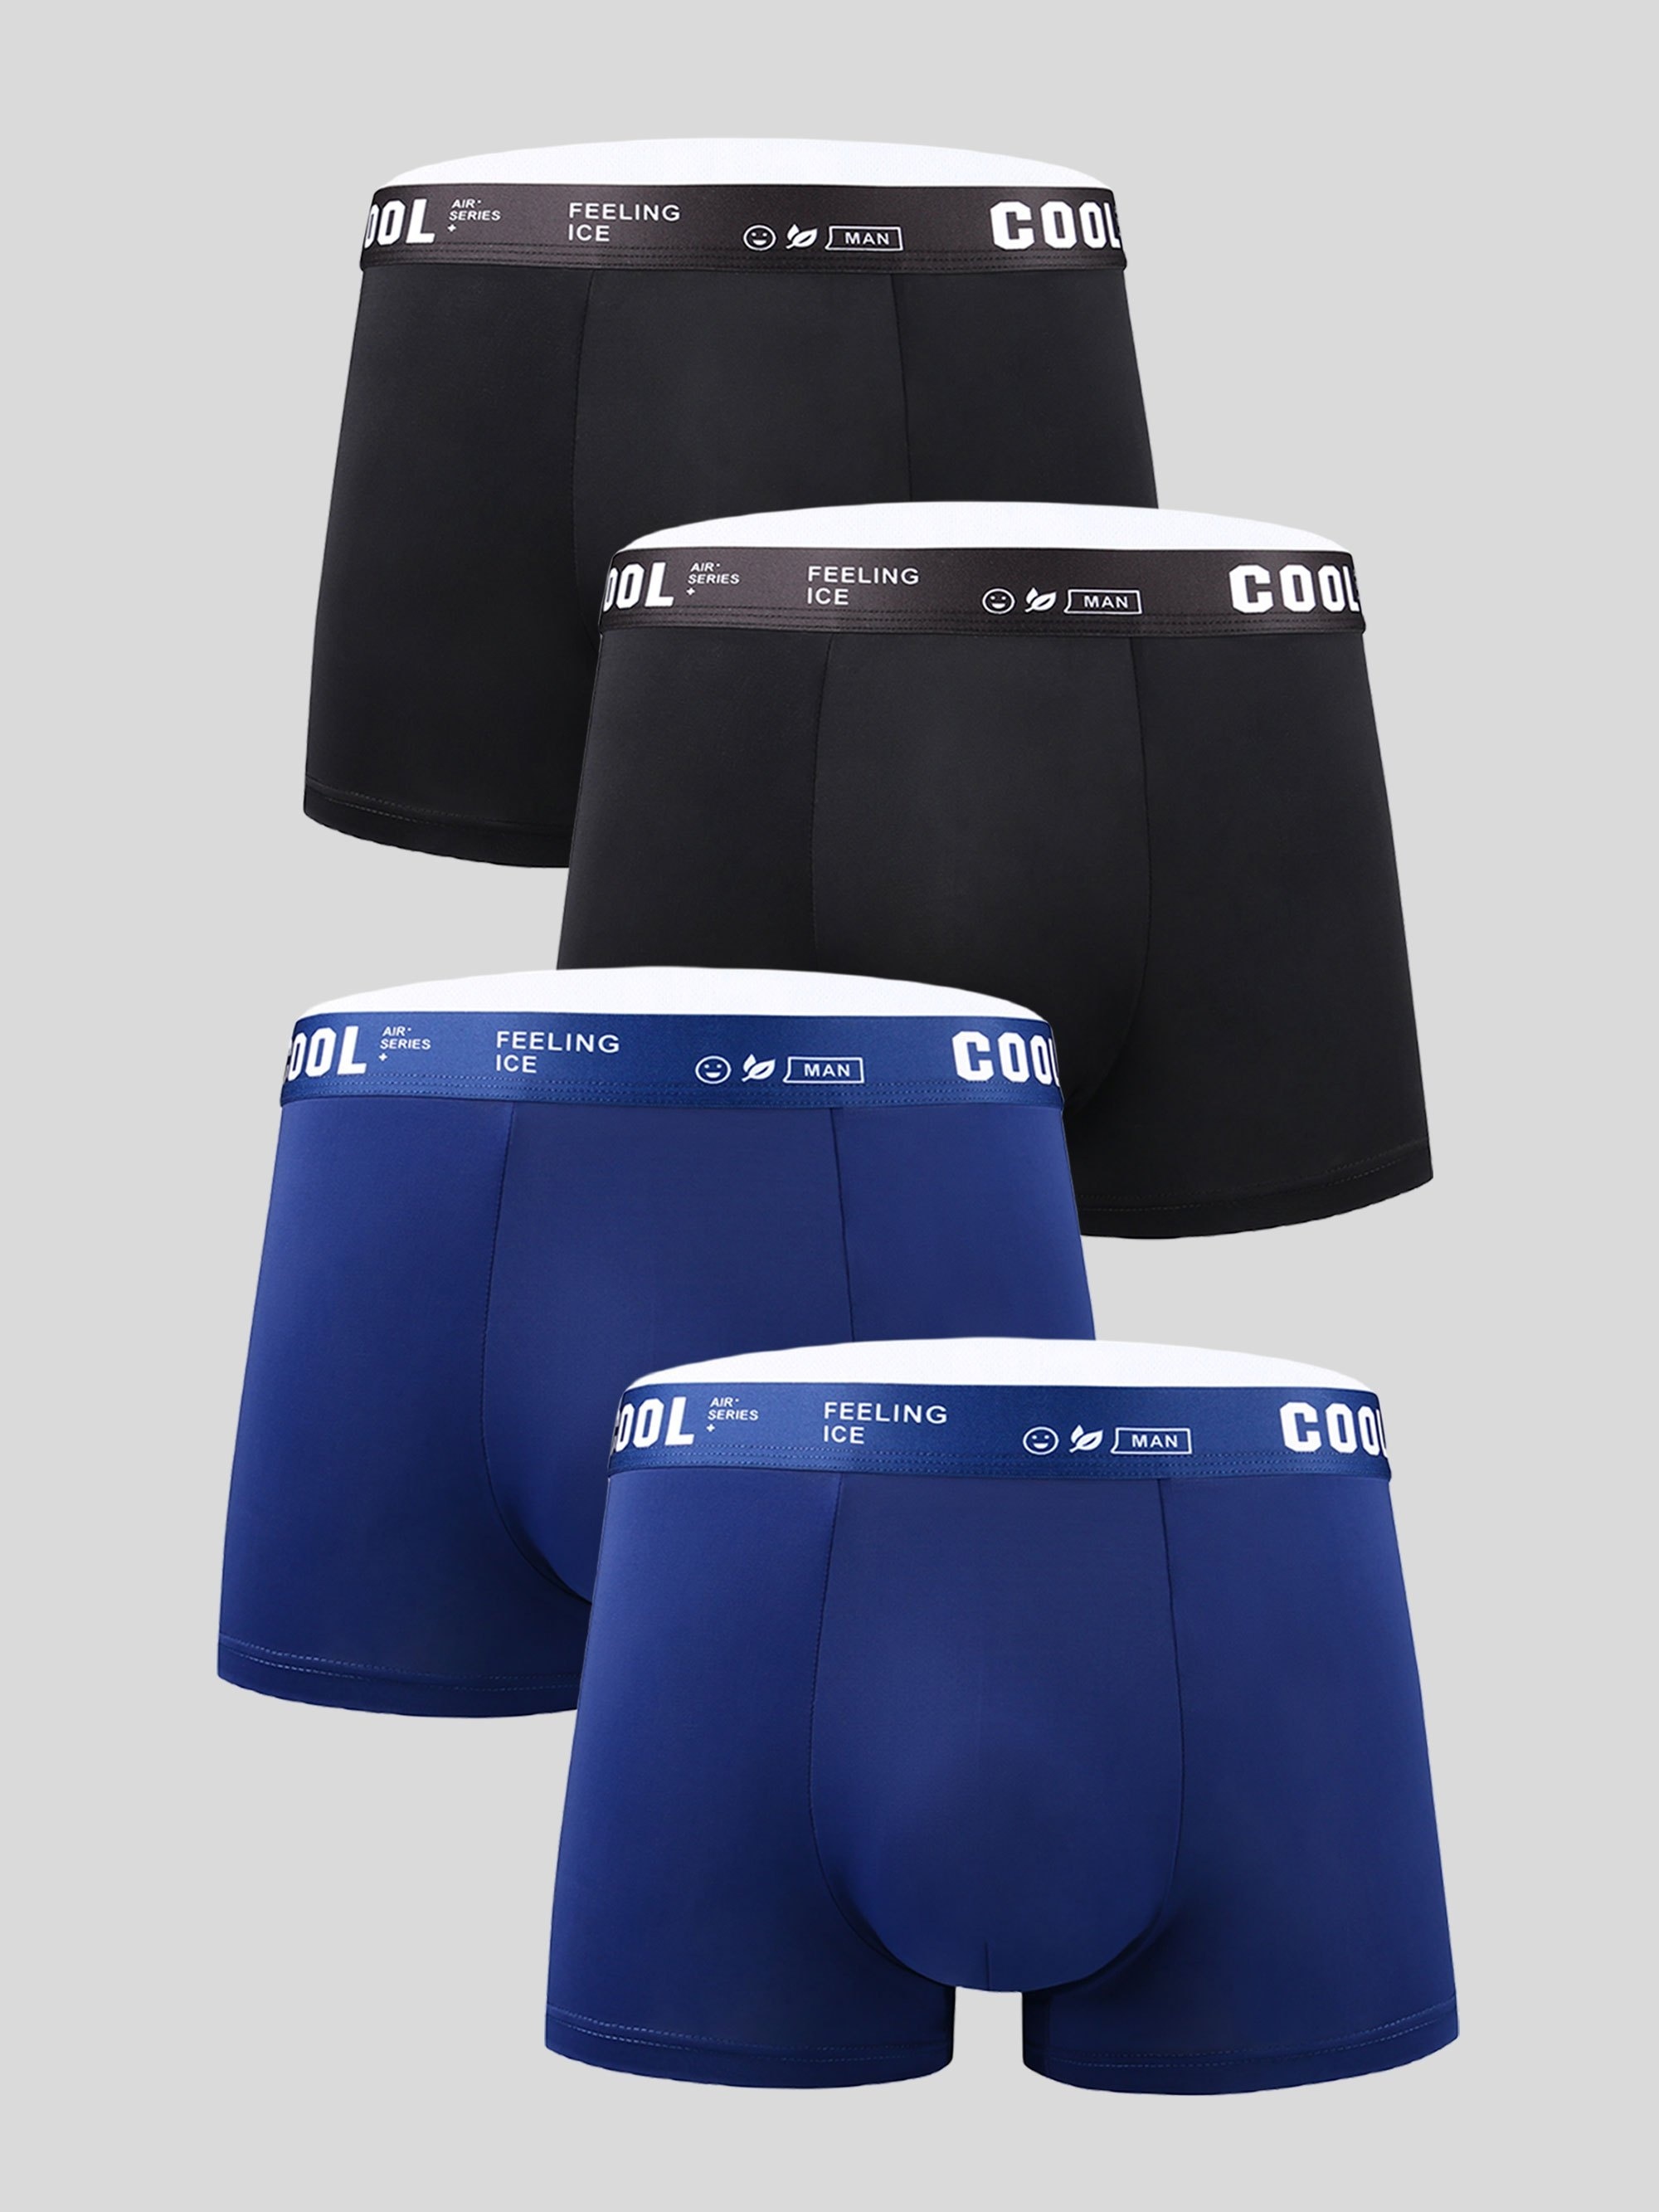 3pcs Men's Ice Silk Cool Soft Comfy Seamless Boxers Briefs Underwear,  Breathable Comfy Stretchy Trunks, Men's Casual Plain Color Underwear